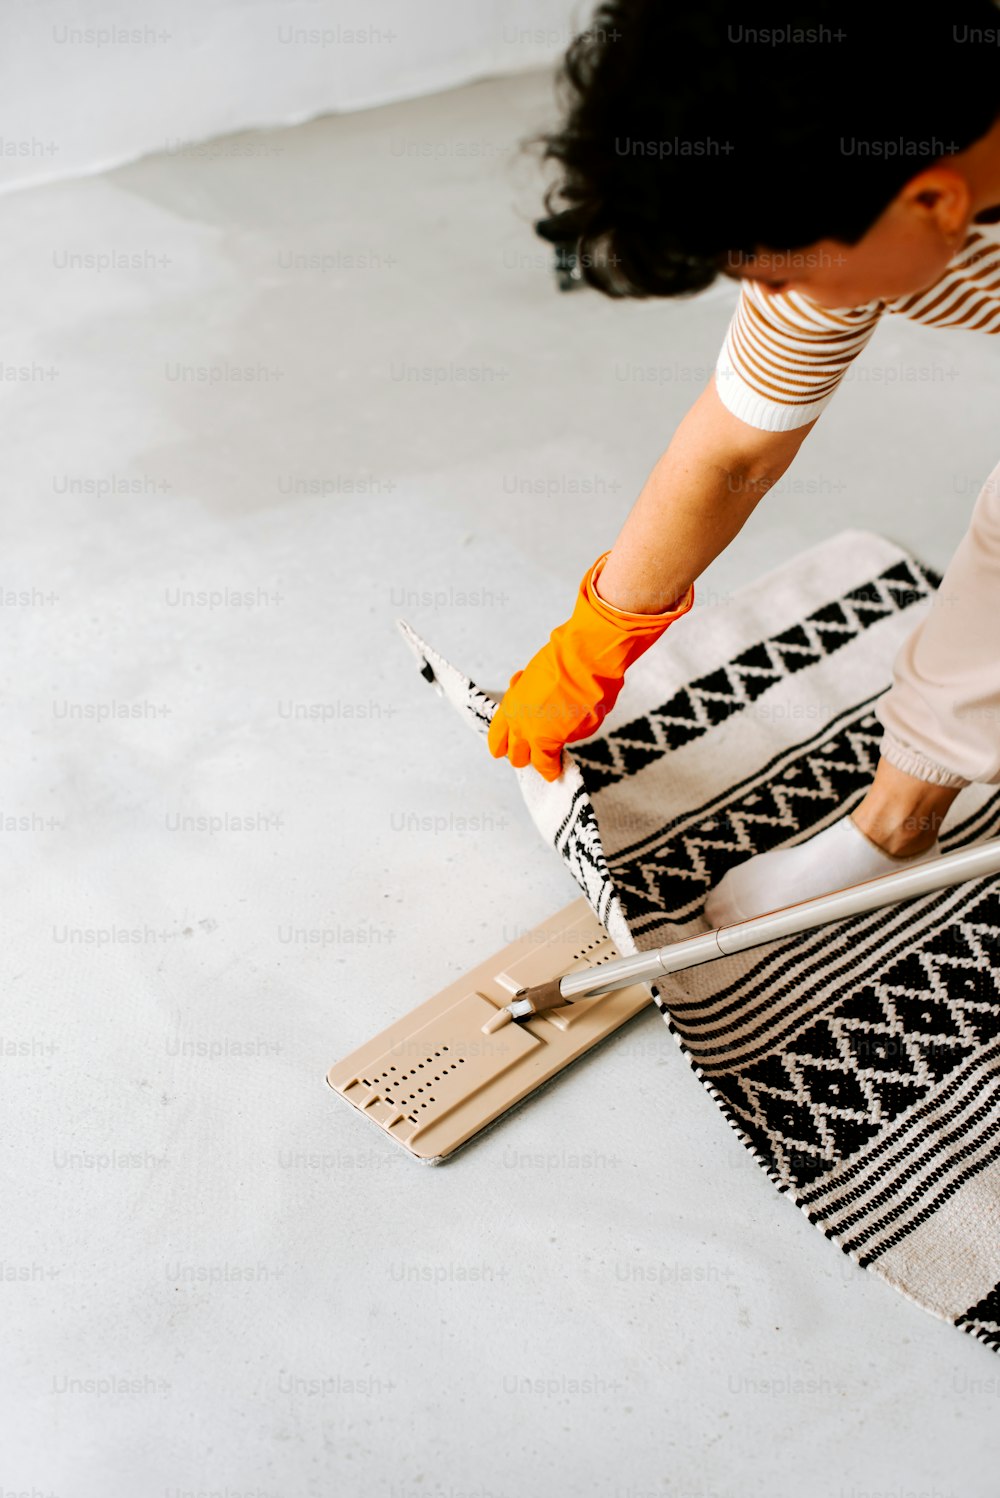 a woman with an orange glove is painting a rug